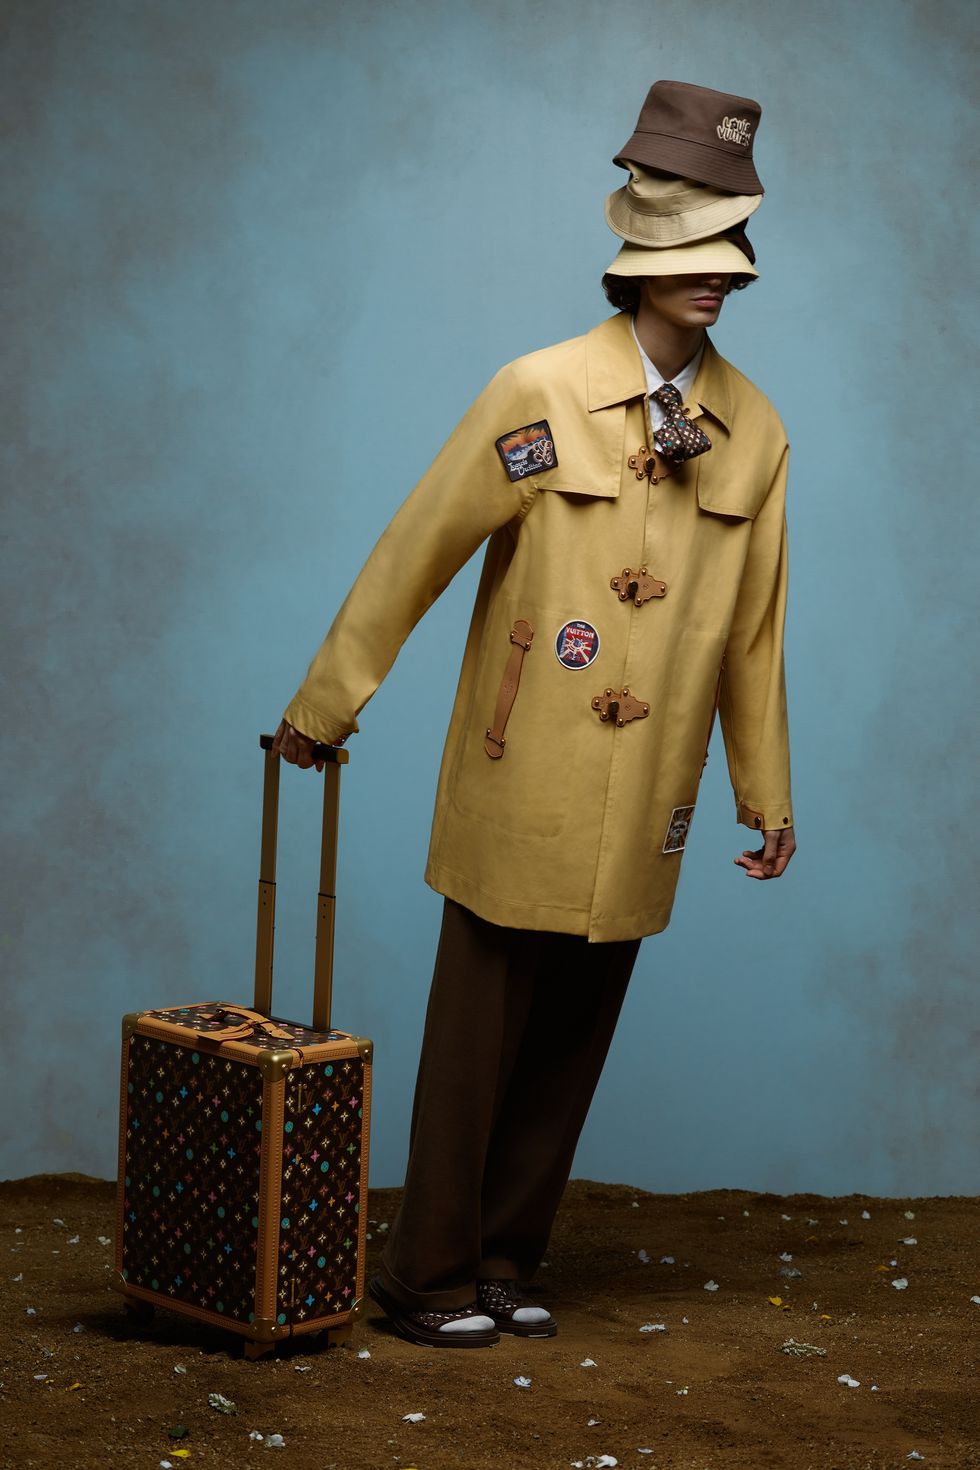 a person in a uniform holding a suitcase